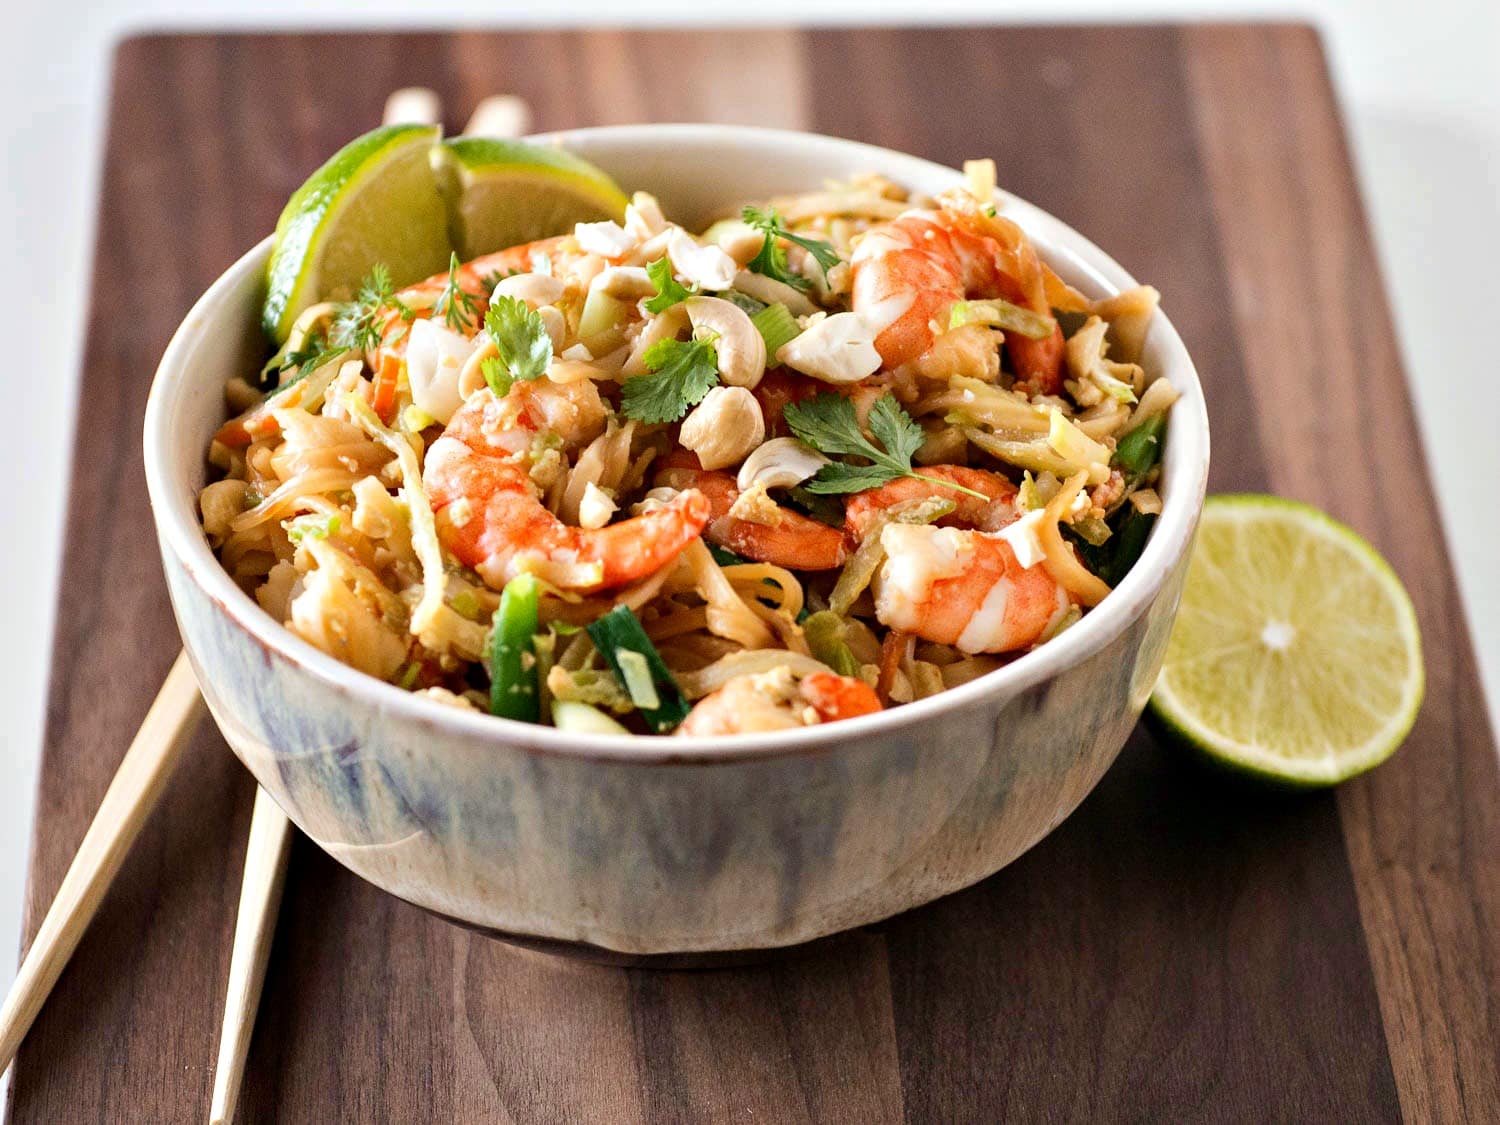 This Easy Shrimp Pad Thai recipe is great for a family weeknight meal and ready in under 30 minutes.